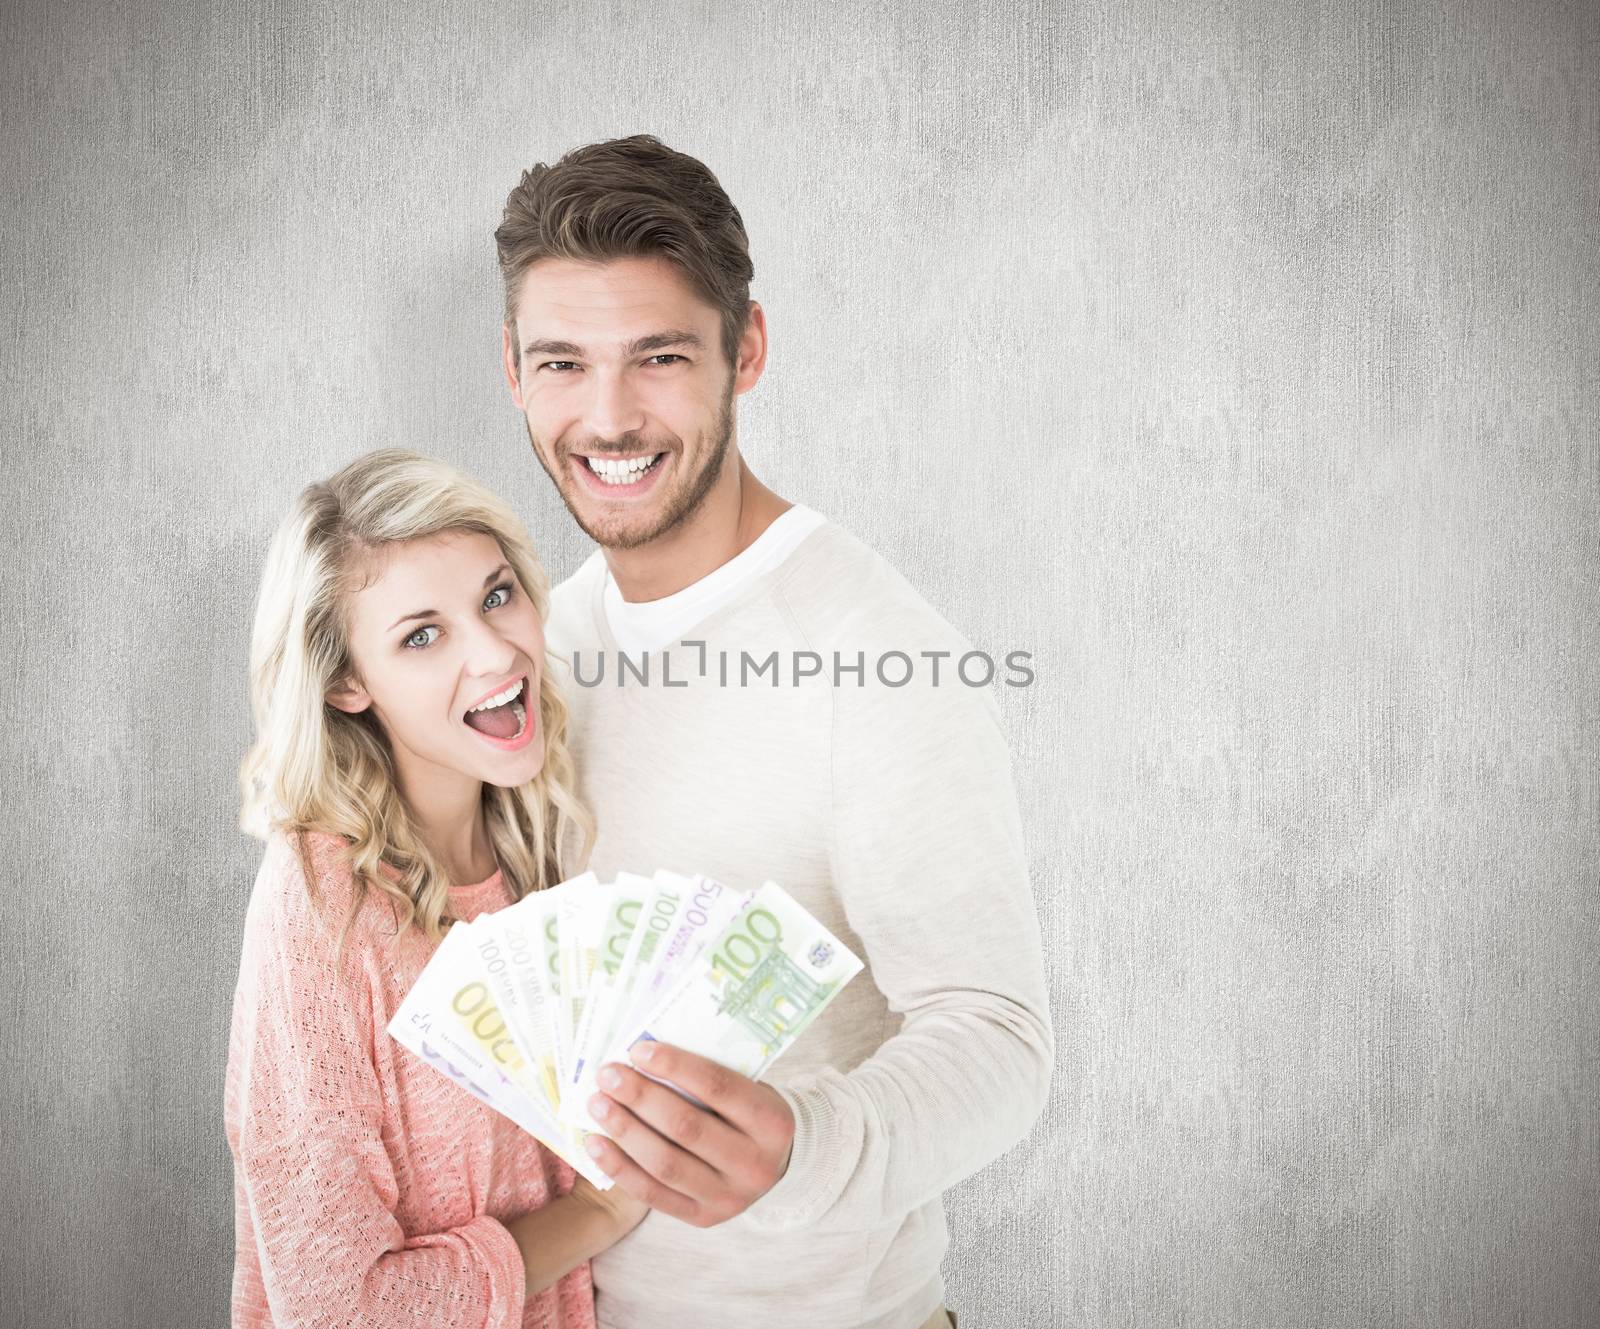 Composite image of attractive couple flashing their cash by Wavebreakmedia